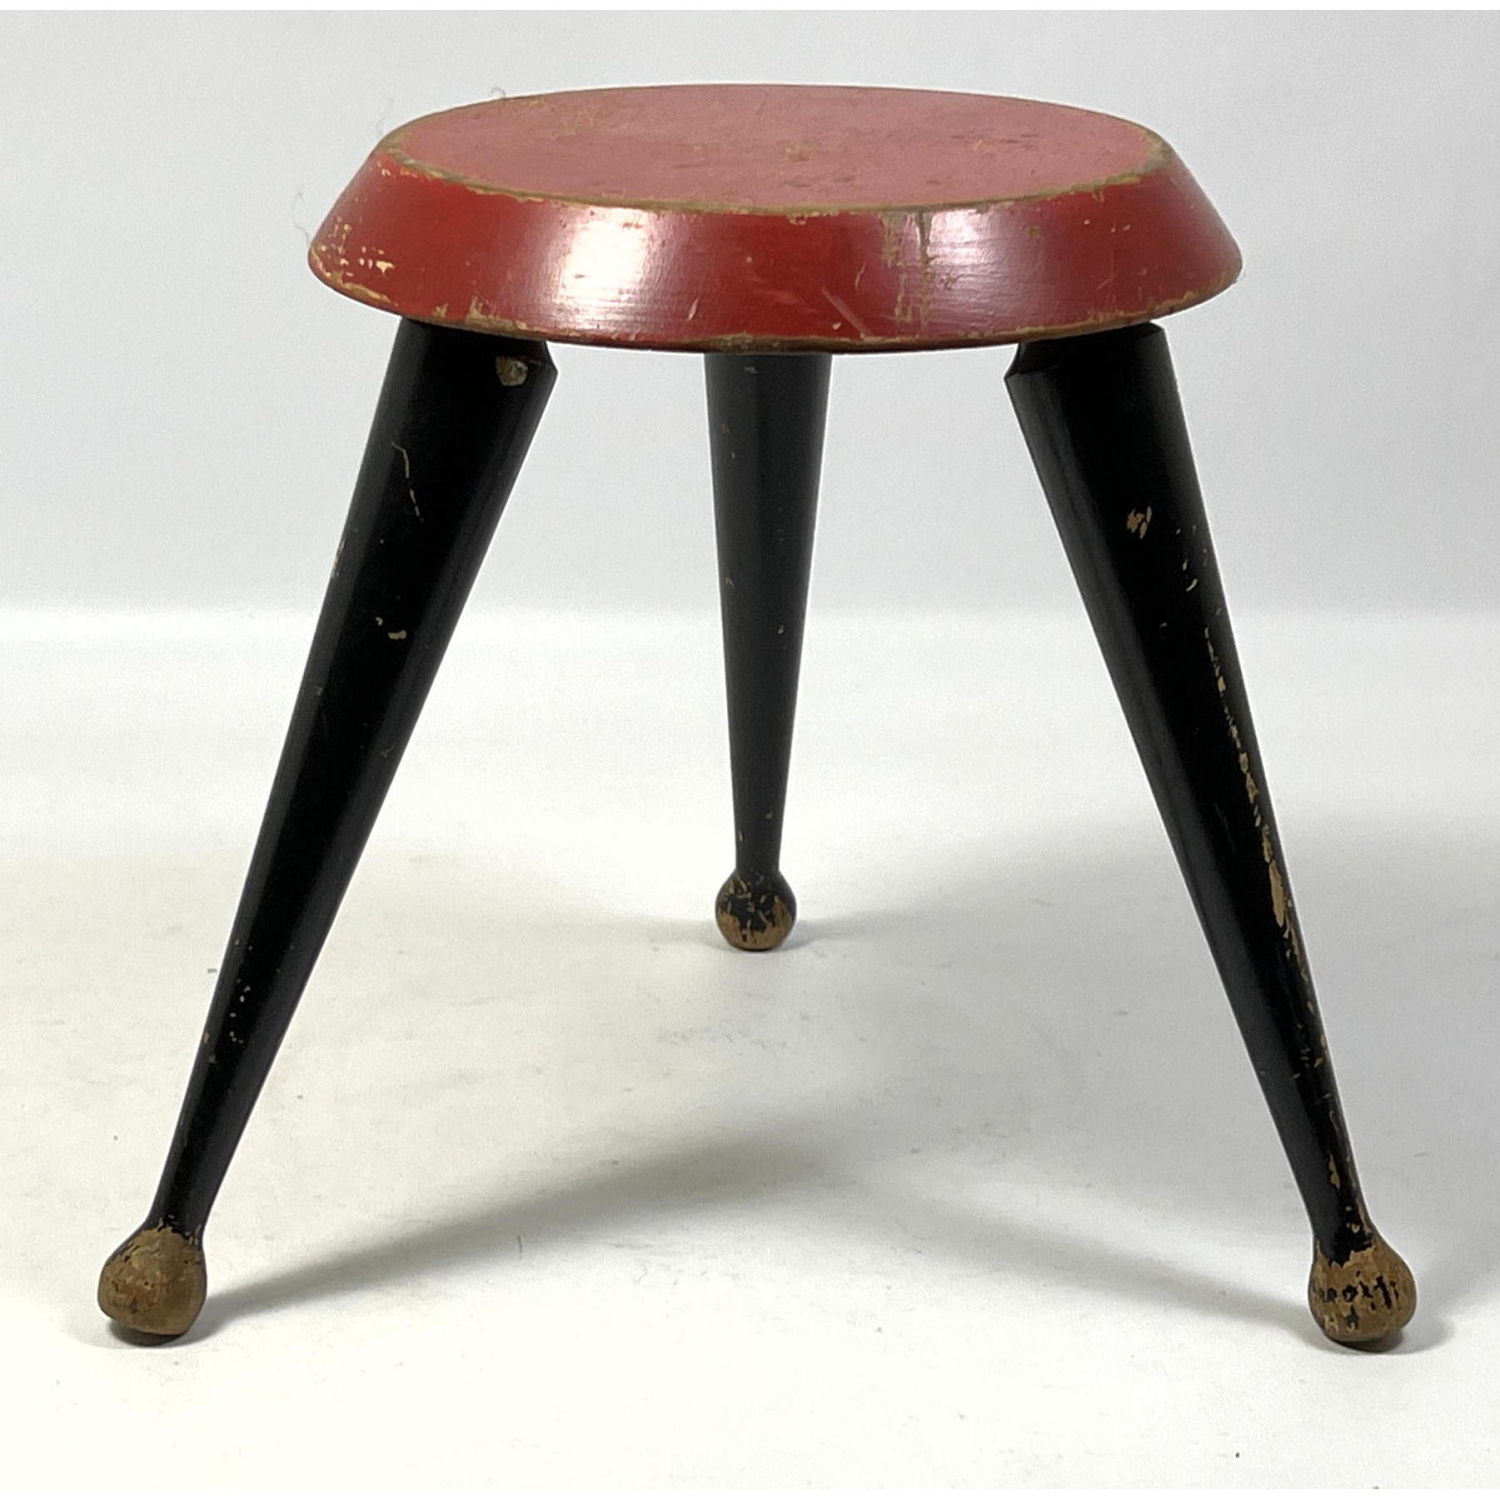 Small French 3 Leg Stool with Drumstick 2fce47